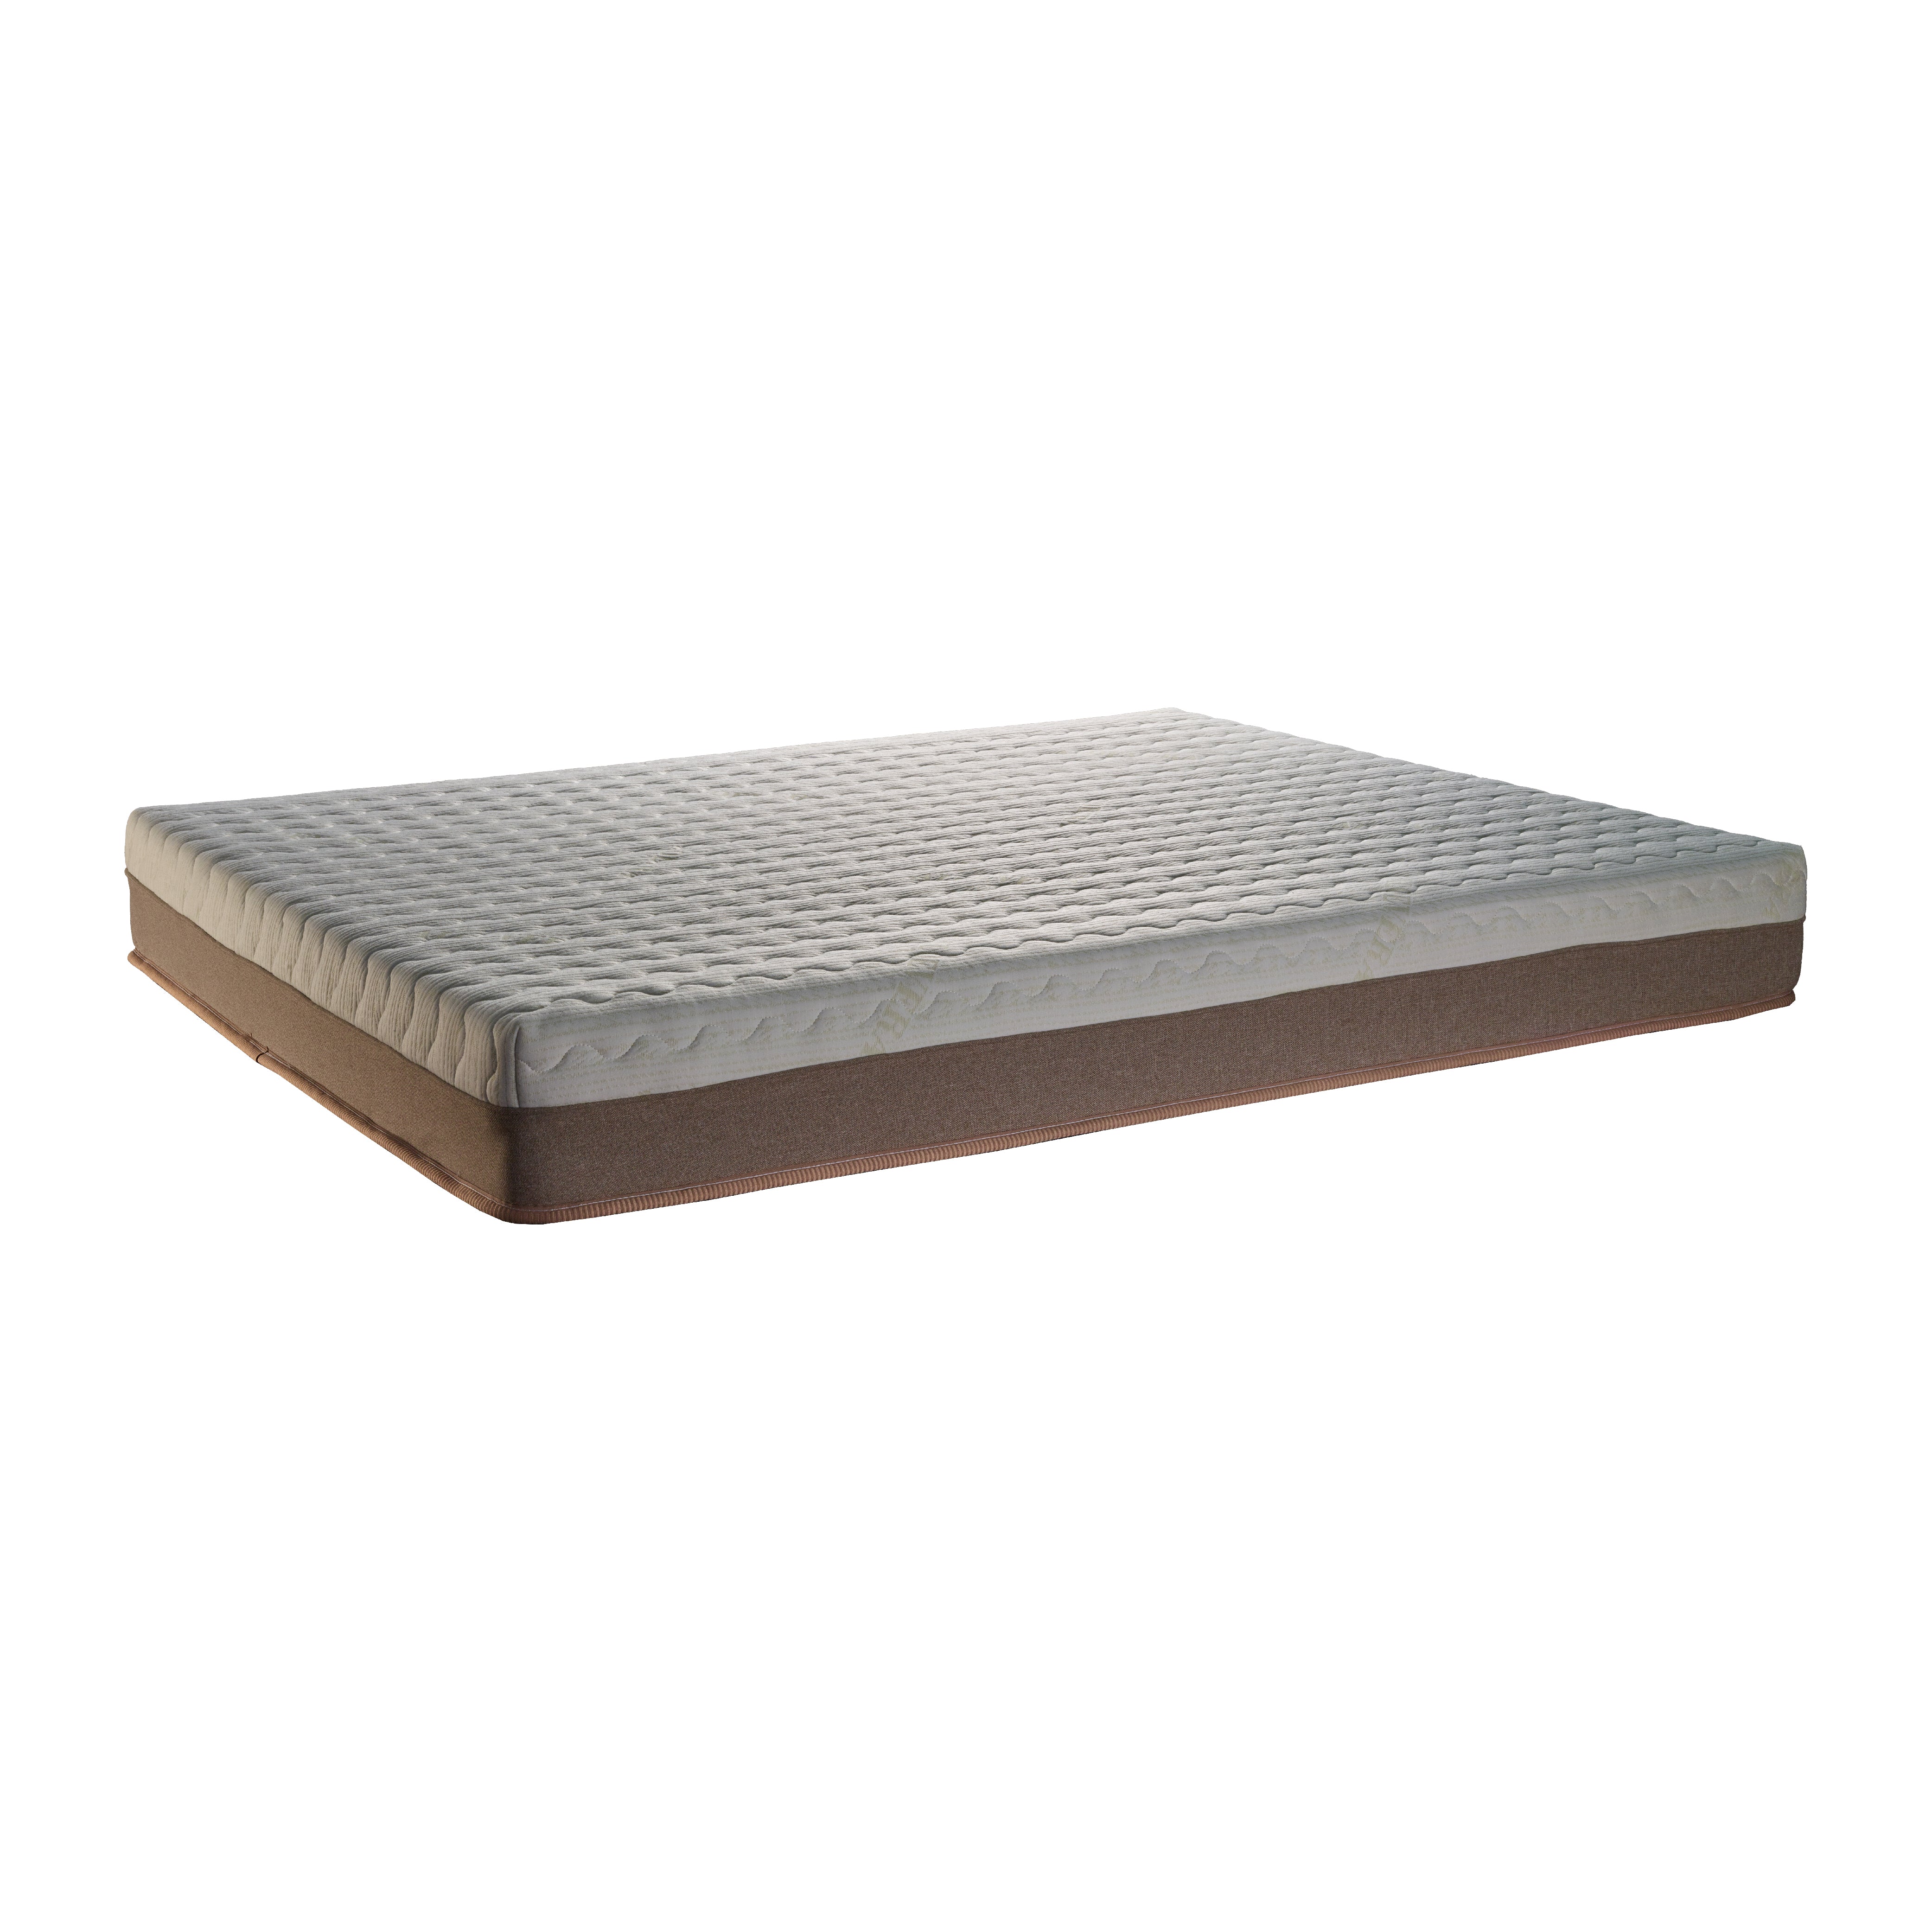 Buy Hypoallergenic Rubberized Coir And Natural Latex Mattress